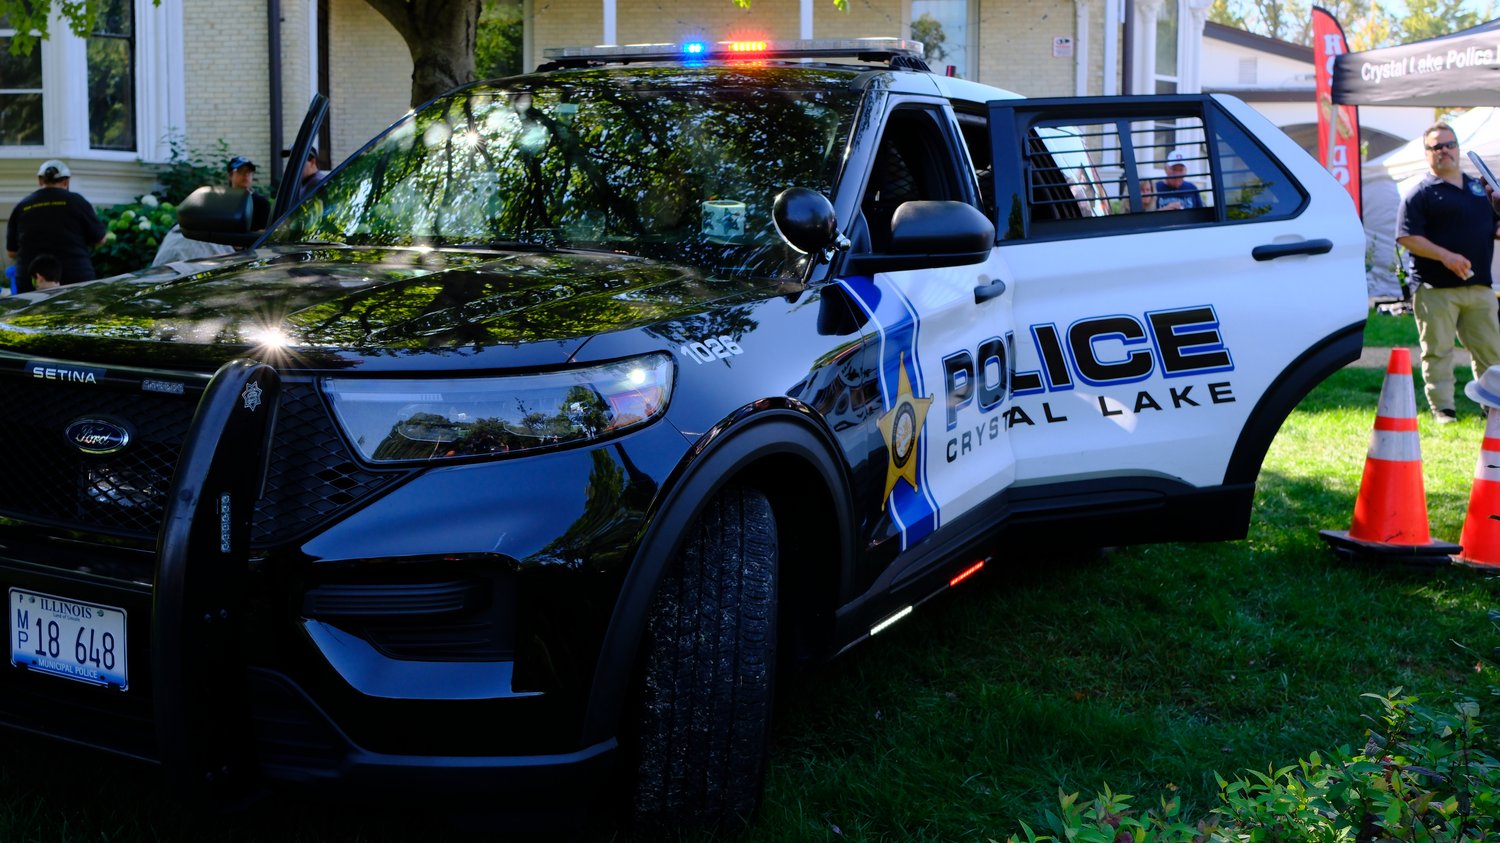 Police SUV on display at the car show.